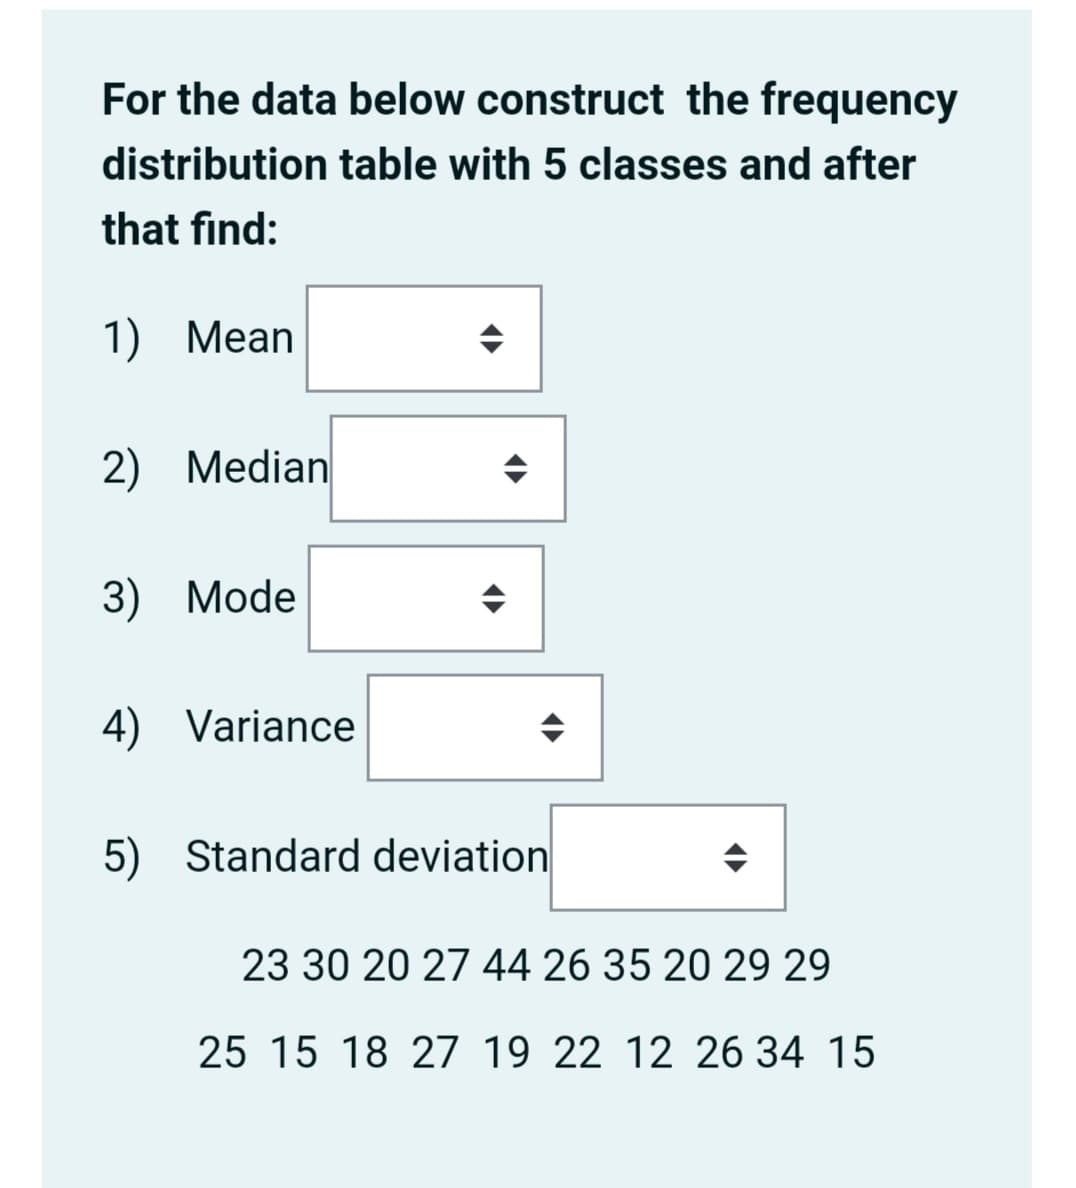 For the data below construct the frequency
distribution table with 5 classes and after
that find:
1) Mean
2) Median
3) Mode
4) Variance
5) Standard deviation
23 30 20 27 44 26 35 20 29 29
25 15 18 27 19 22 12 26 34 15
